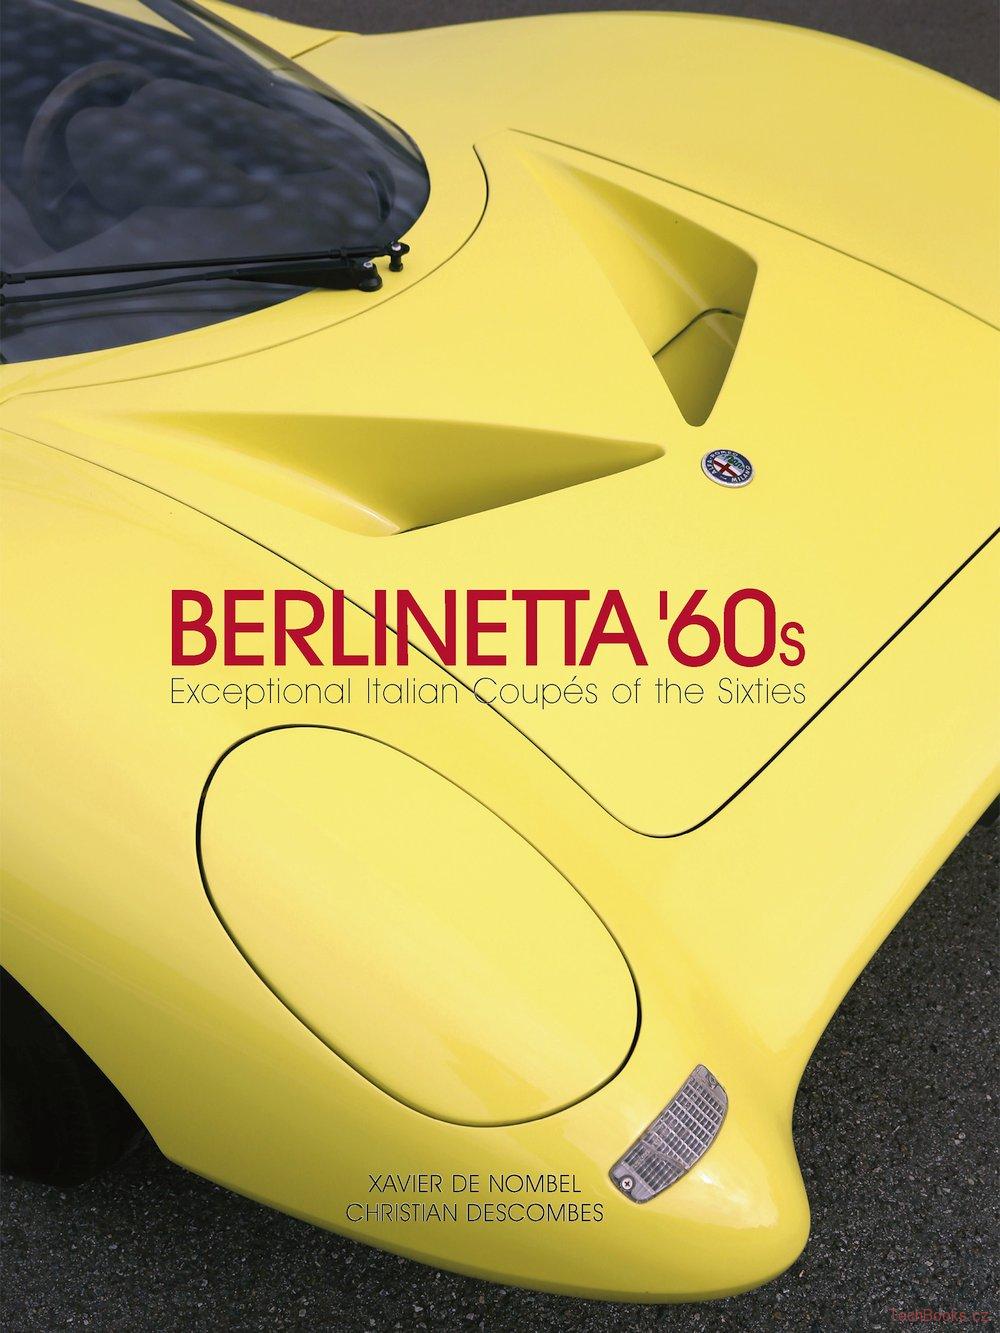 Berlinetta '60s: Exceptional Italian Coupés of the 1960s